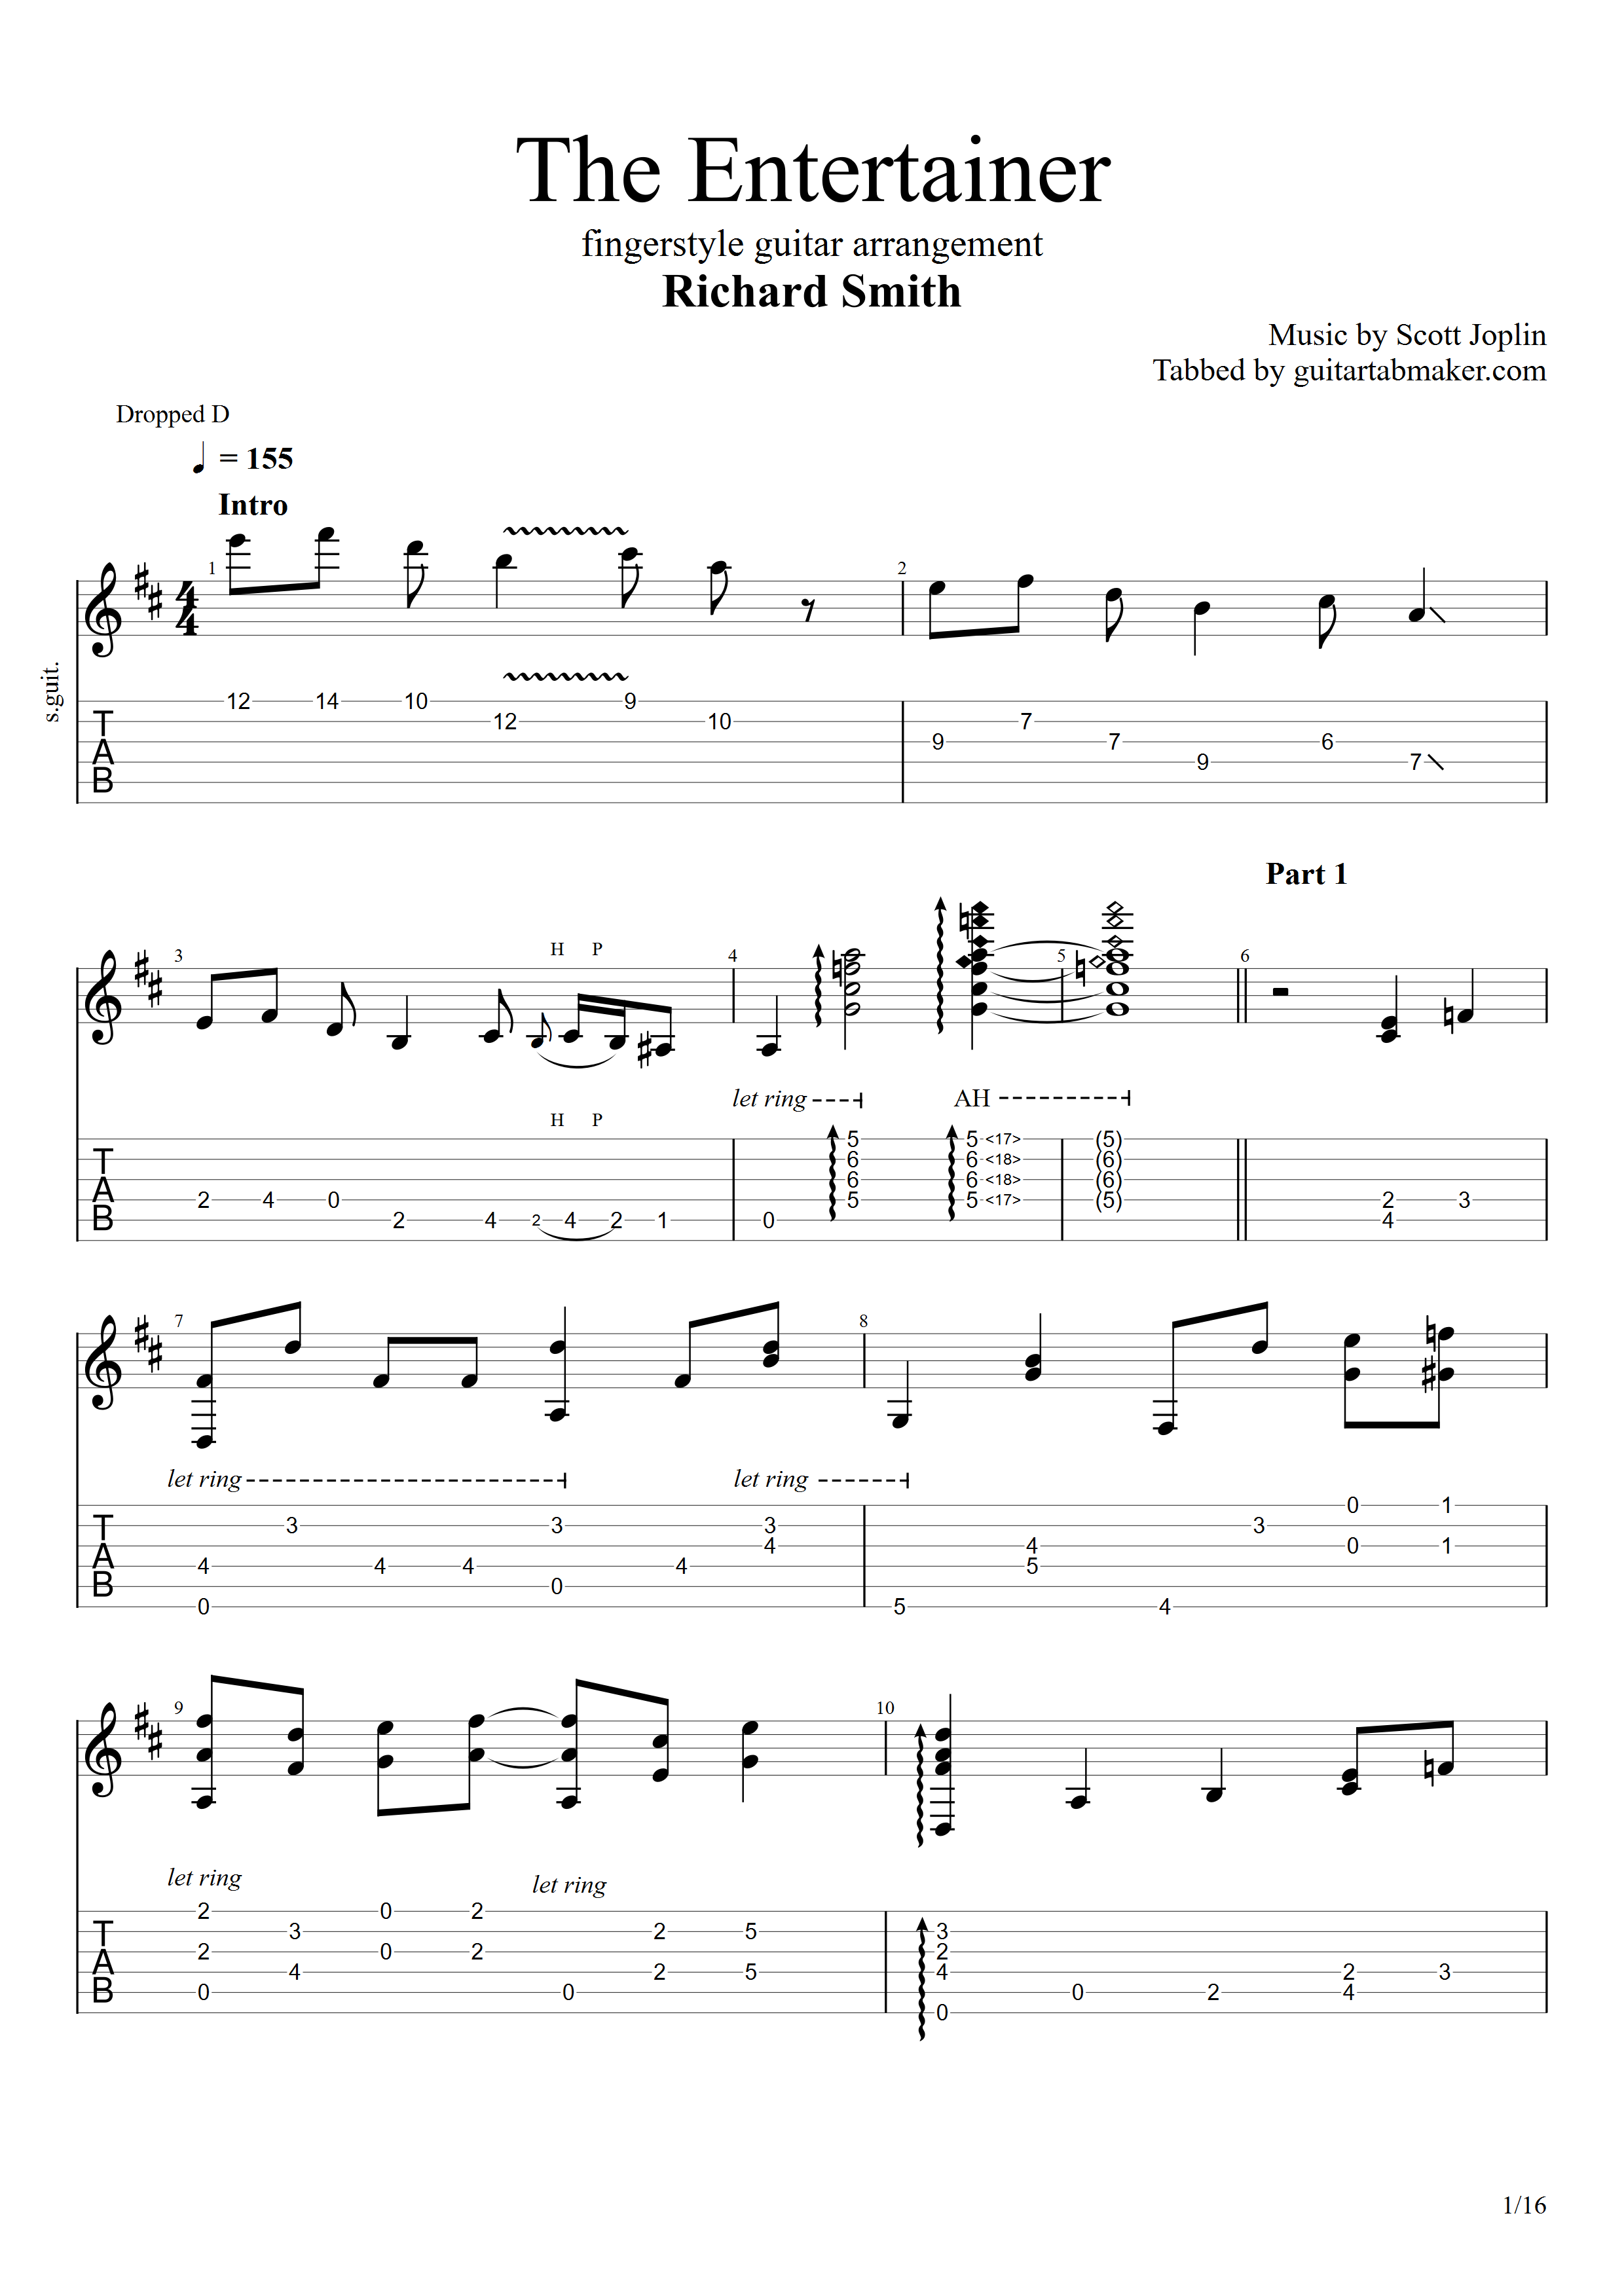 The Entertainer fingerstyle guitar TAB